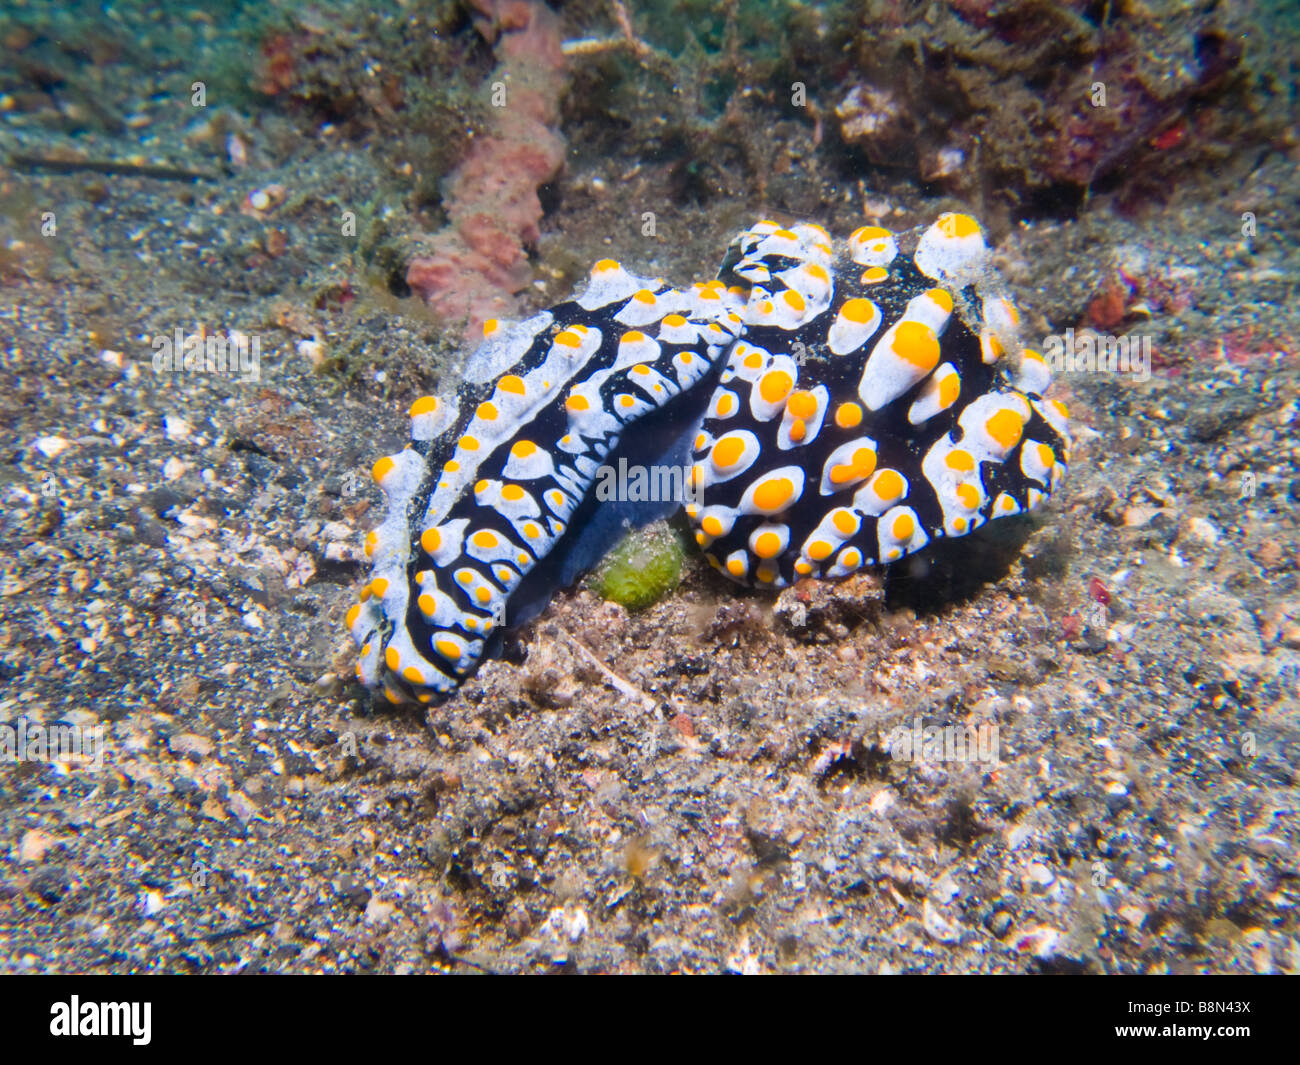 Nudibranchs or sea slugs.  Muck diving in Lembeh Straits, North Sulawesi, Indonesia. Stock Photo